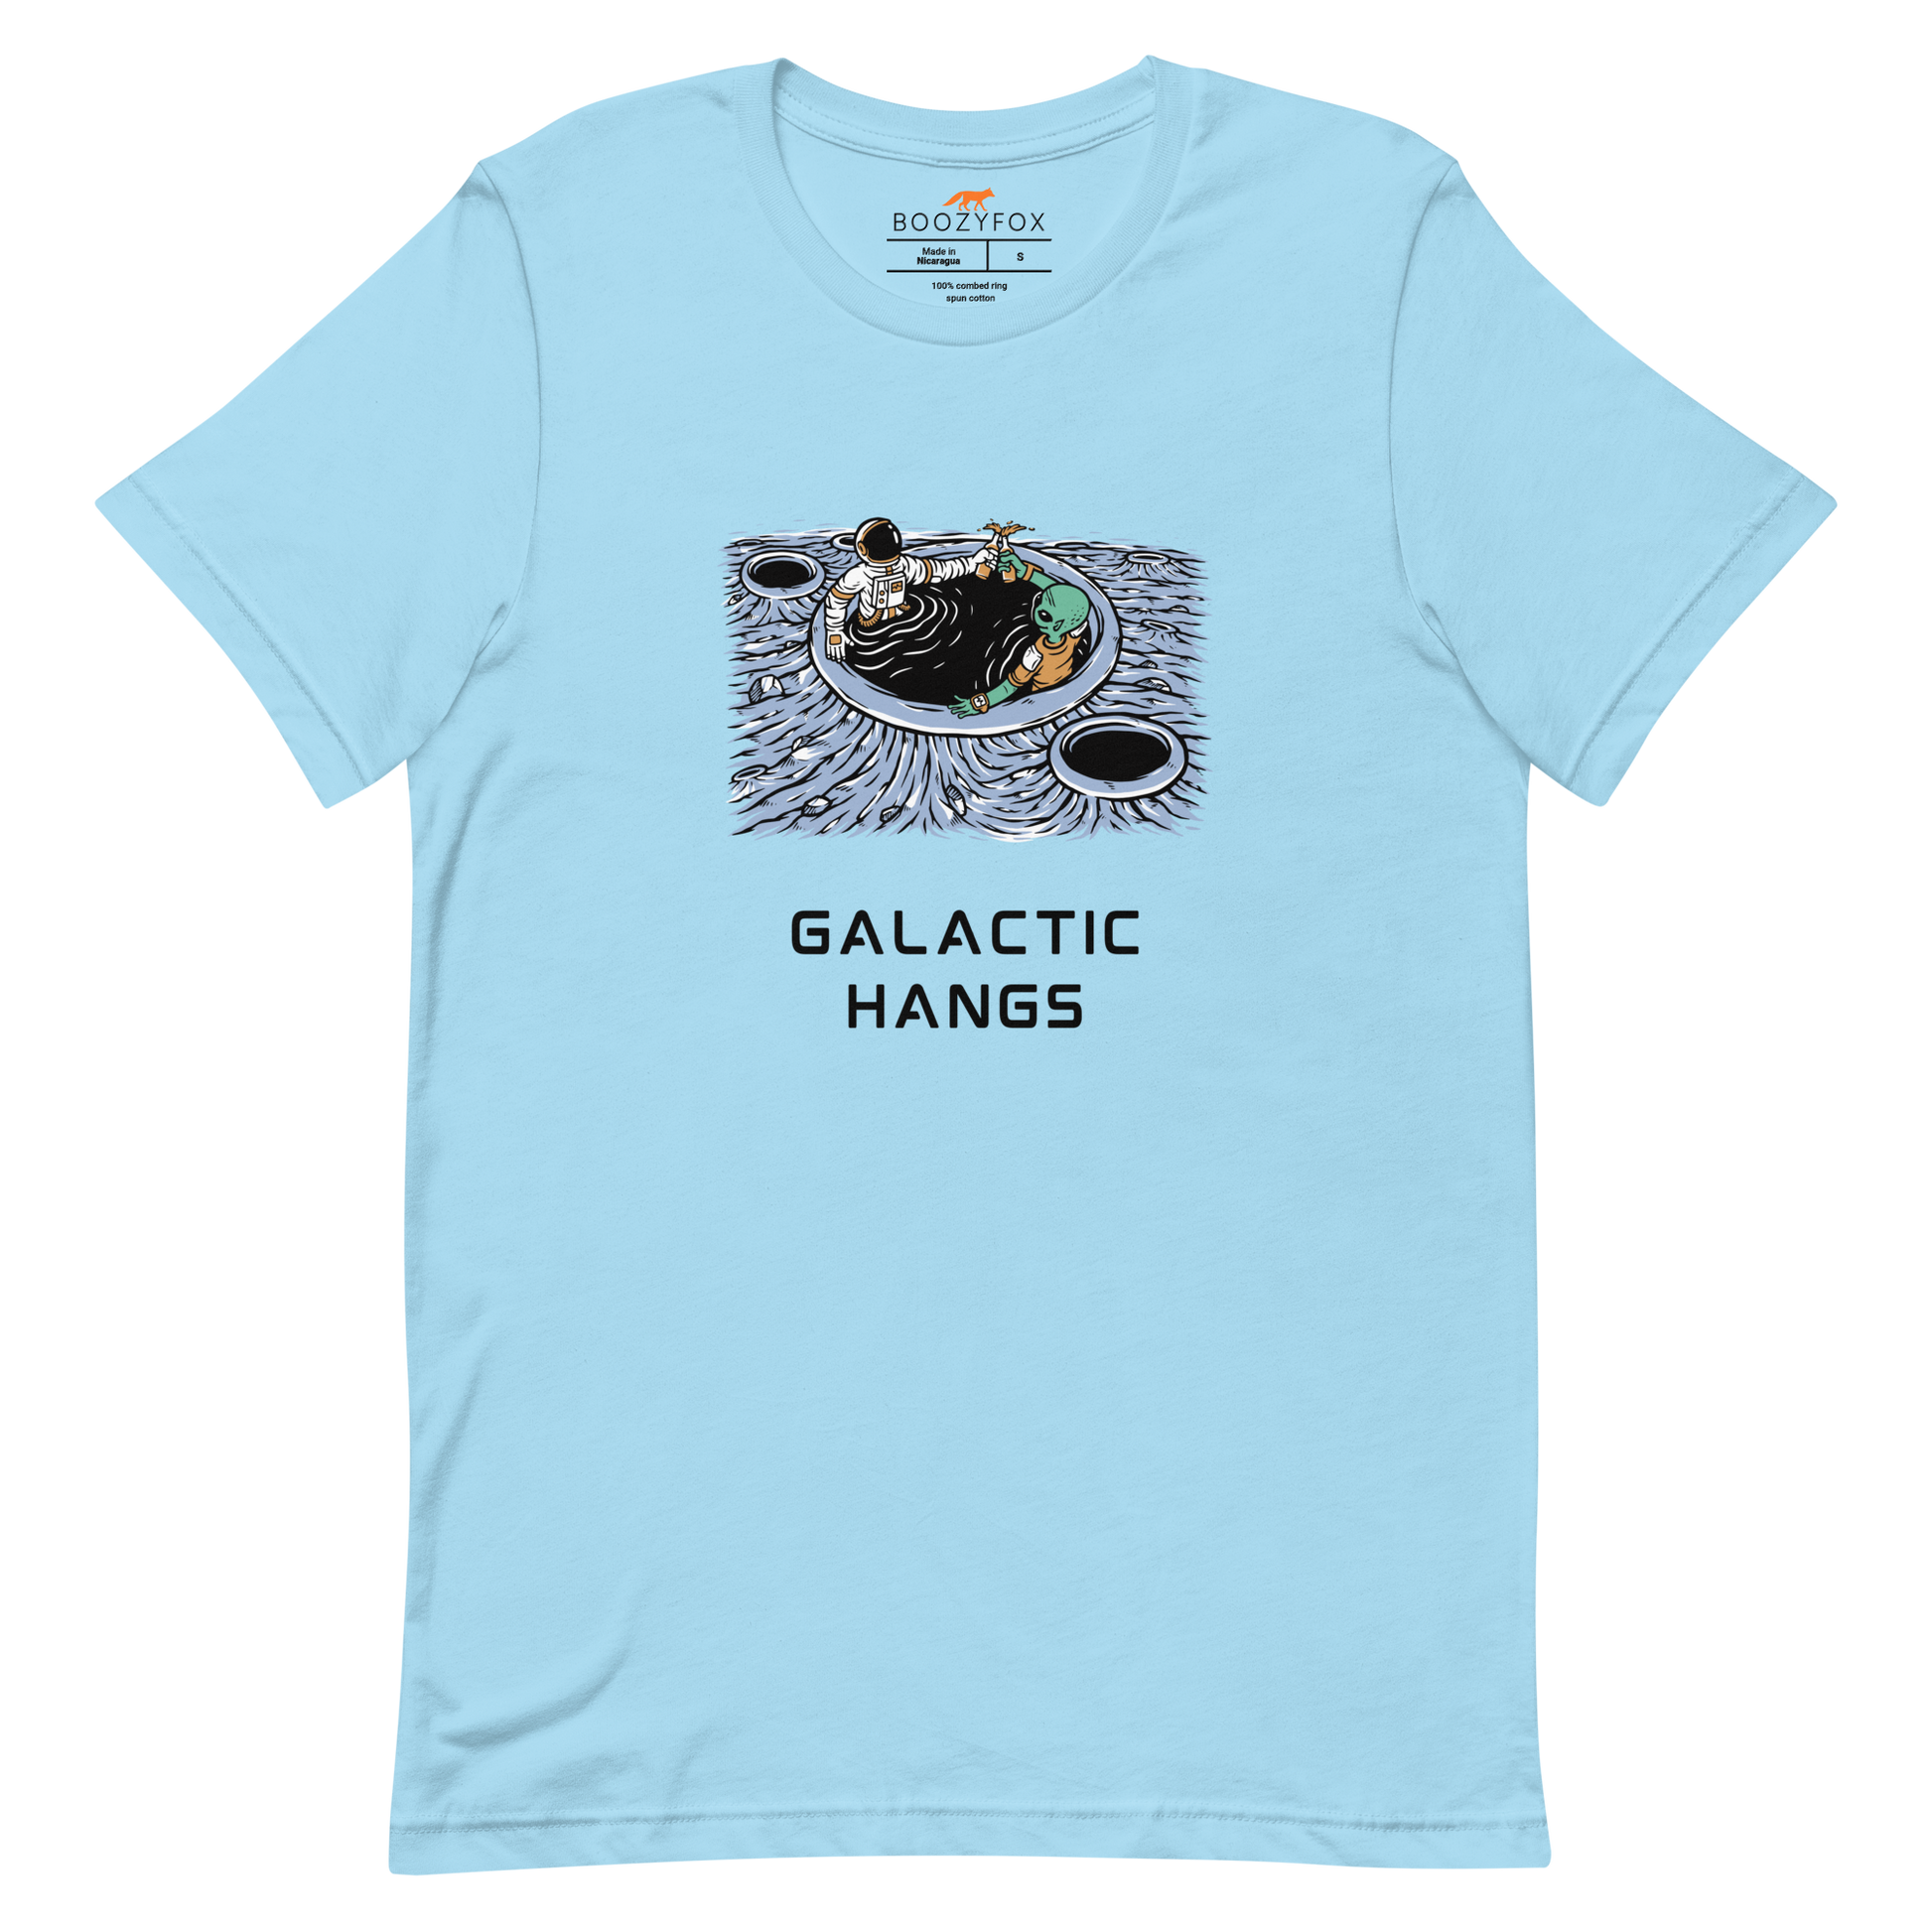 Ocean Blue Premium Galactic Hangs Tee featuring an out-of-this-world graphic of an Astronaut and Alien Chilling Together - Funny Graphic Space Tees - Boozy Fox